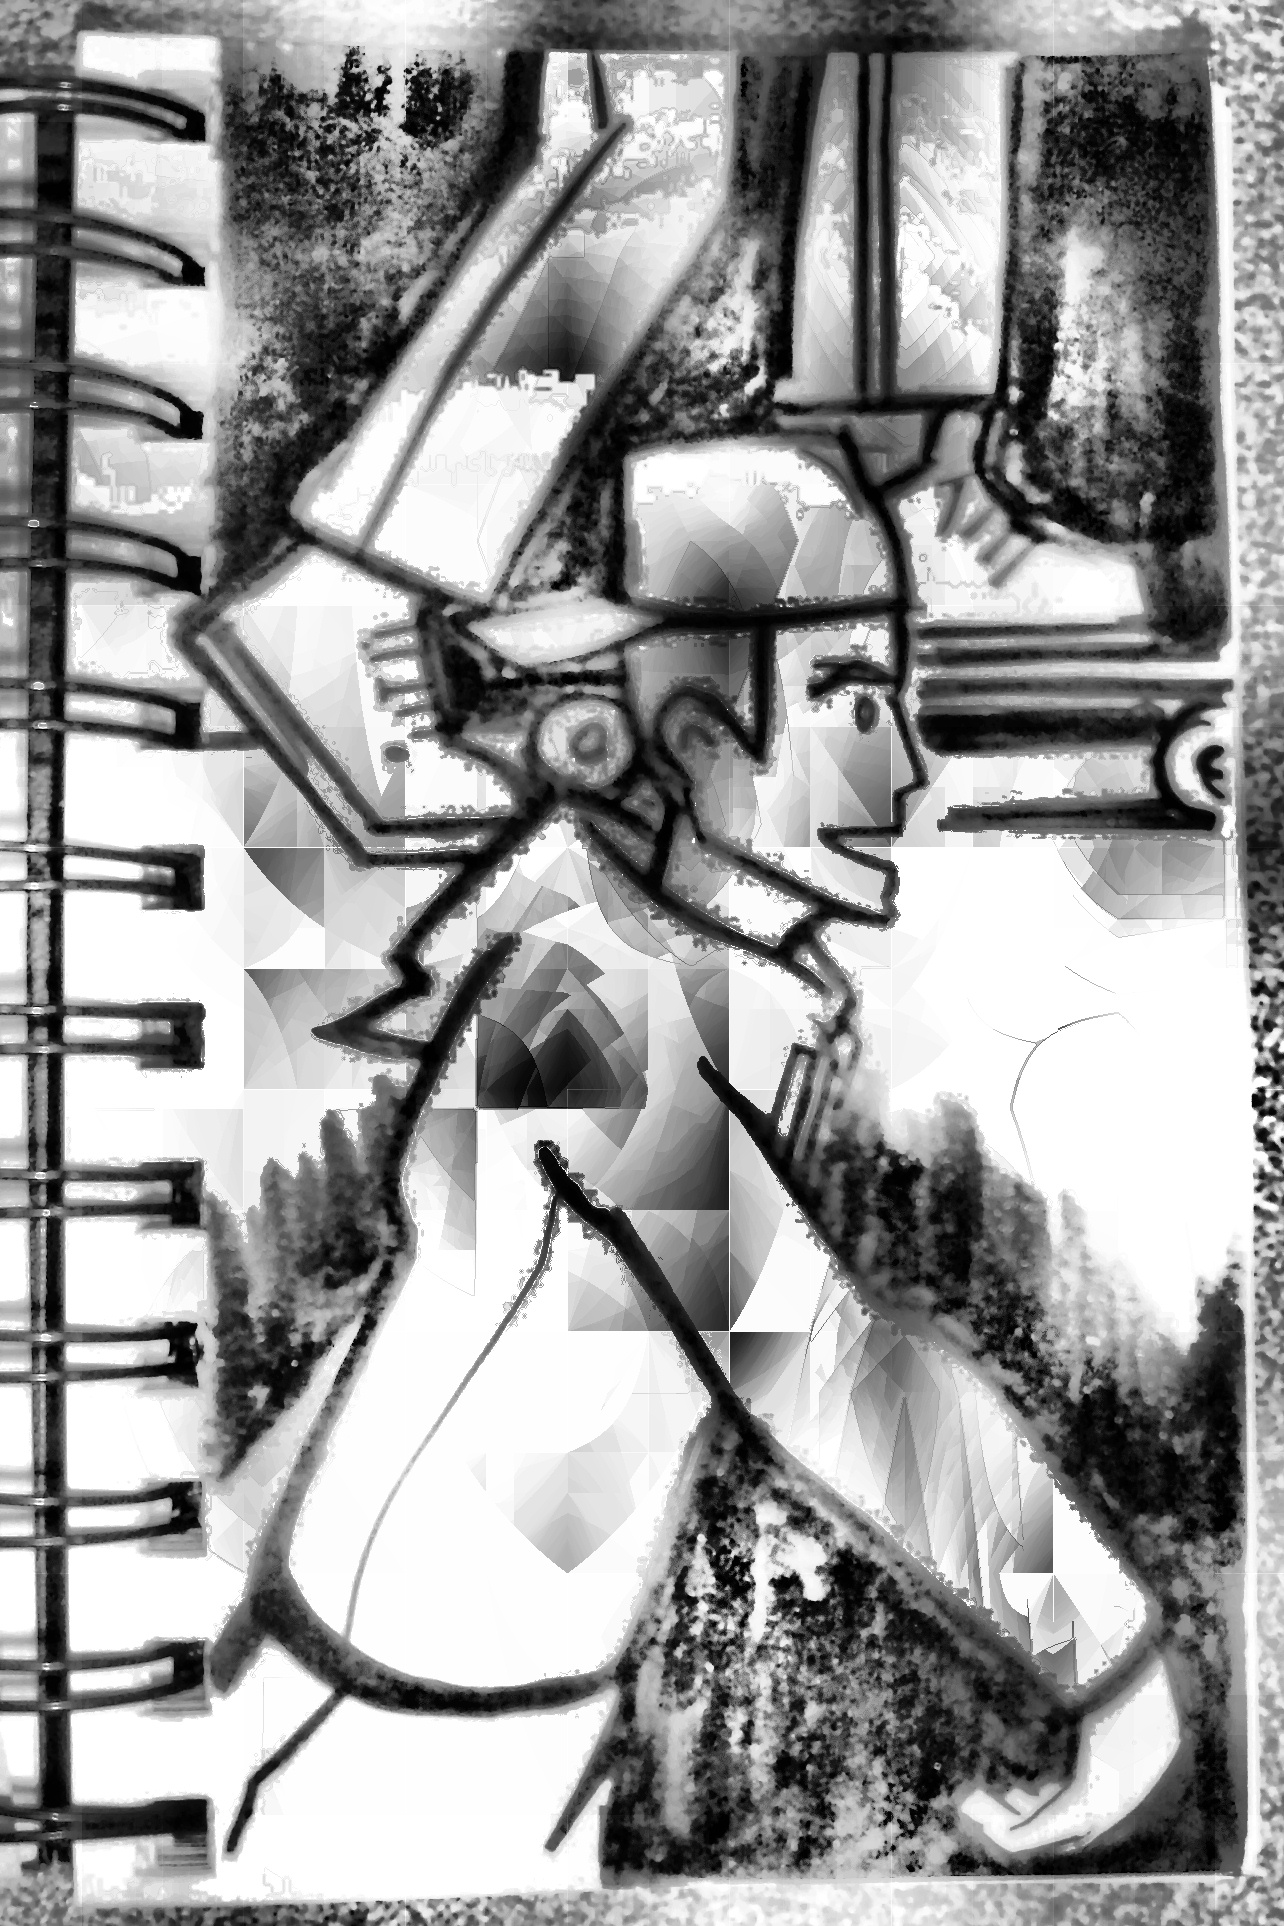 there is a man with an umbrella in a graphite style